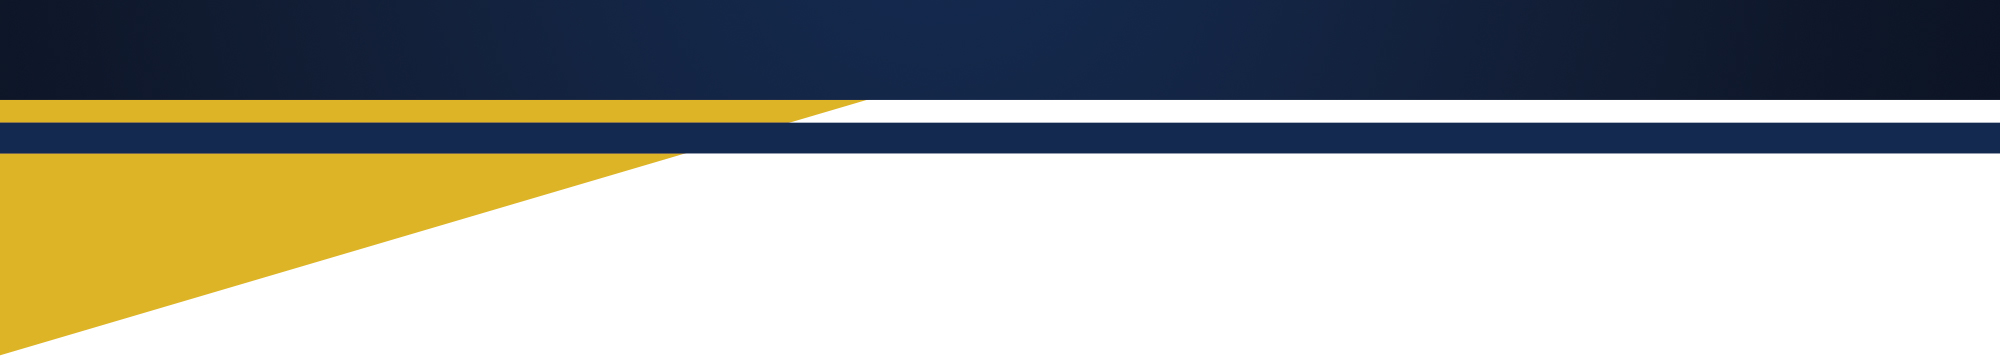 yellow and navy banner